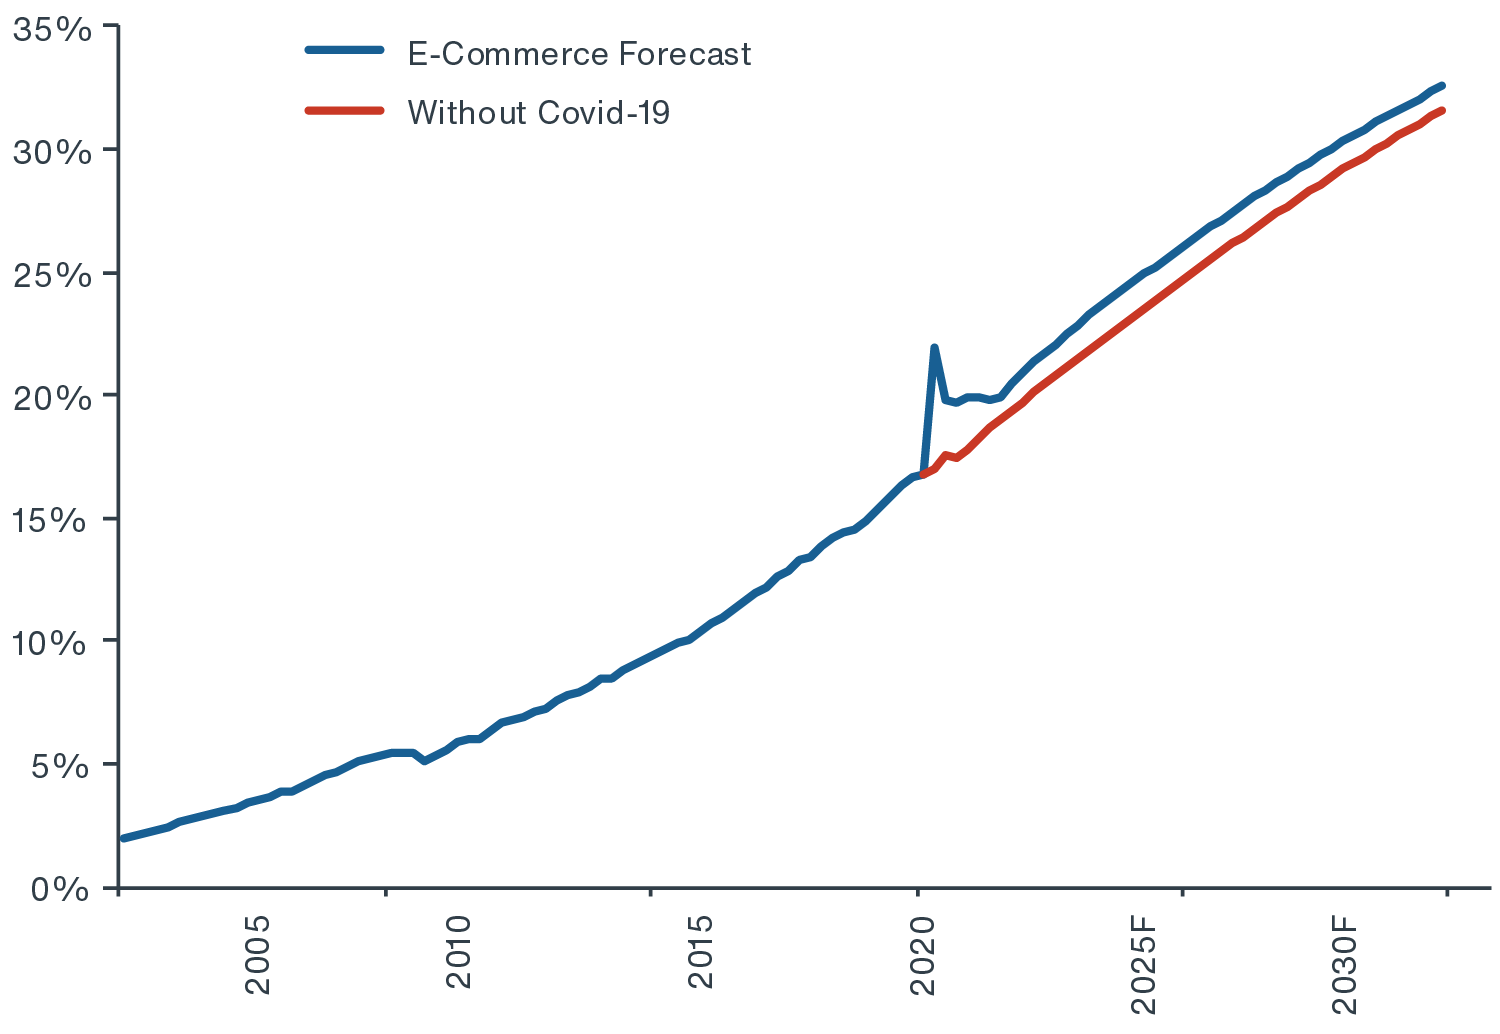 US e-commerce sales as a share of core retail sales